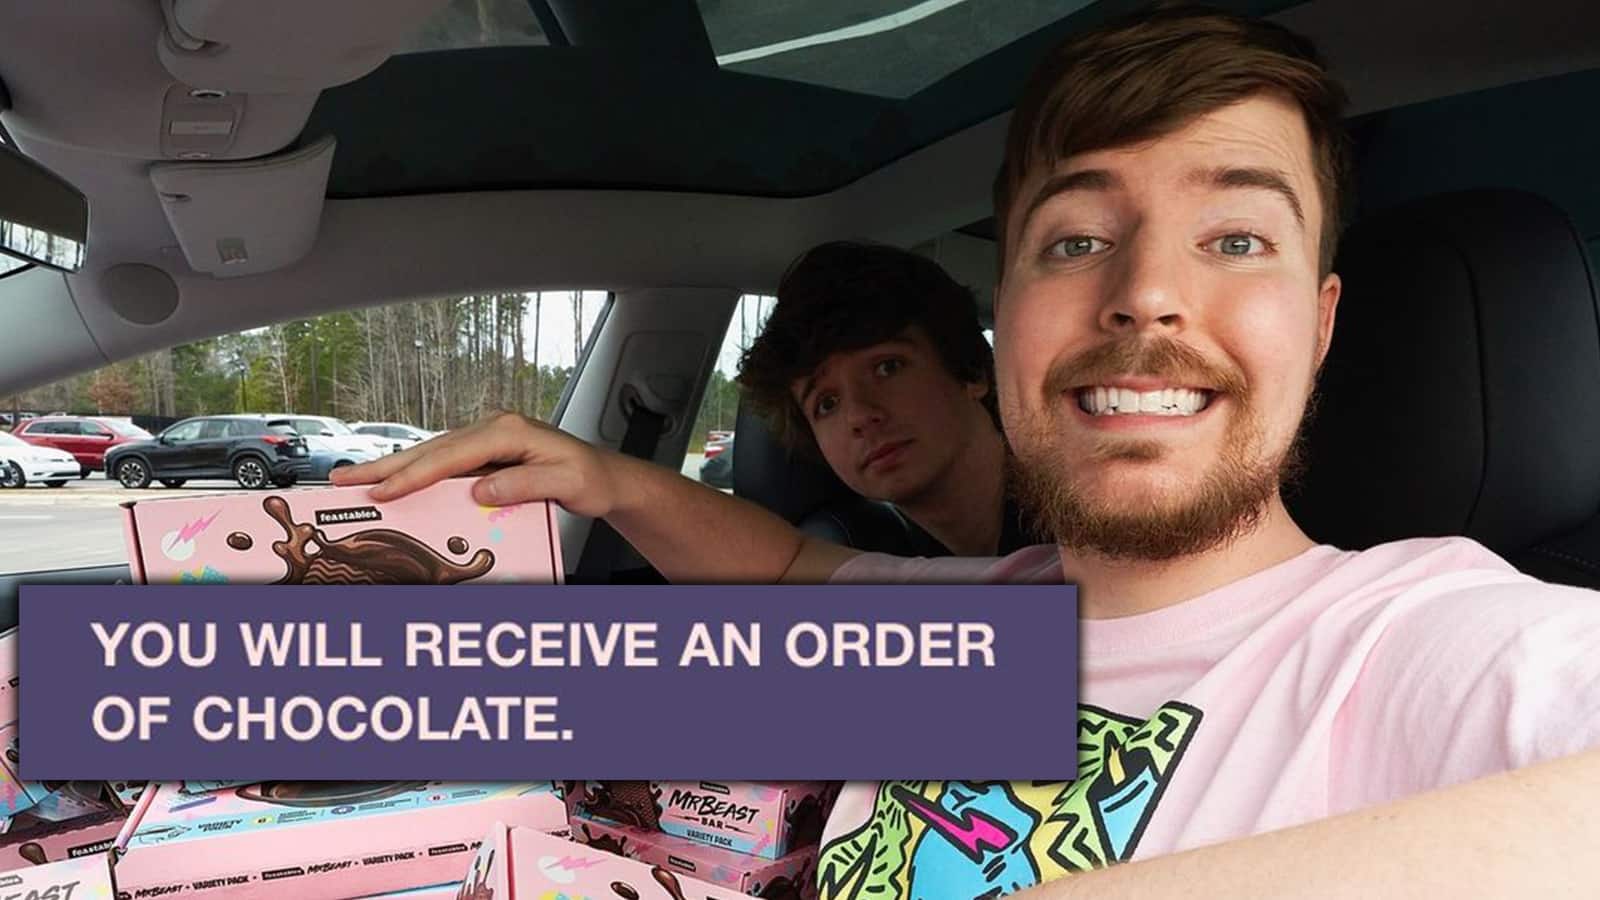 Yes, the rumours are true. MrBeast's Feastables chocolate bars are